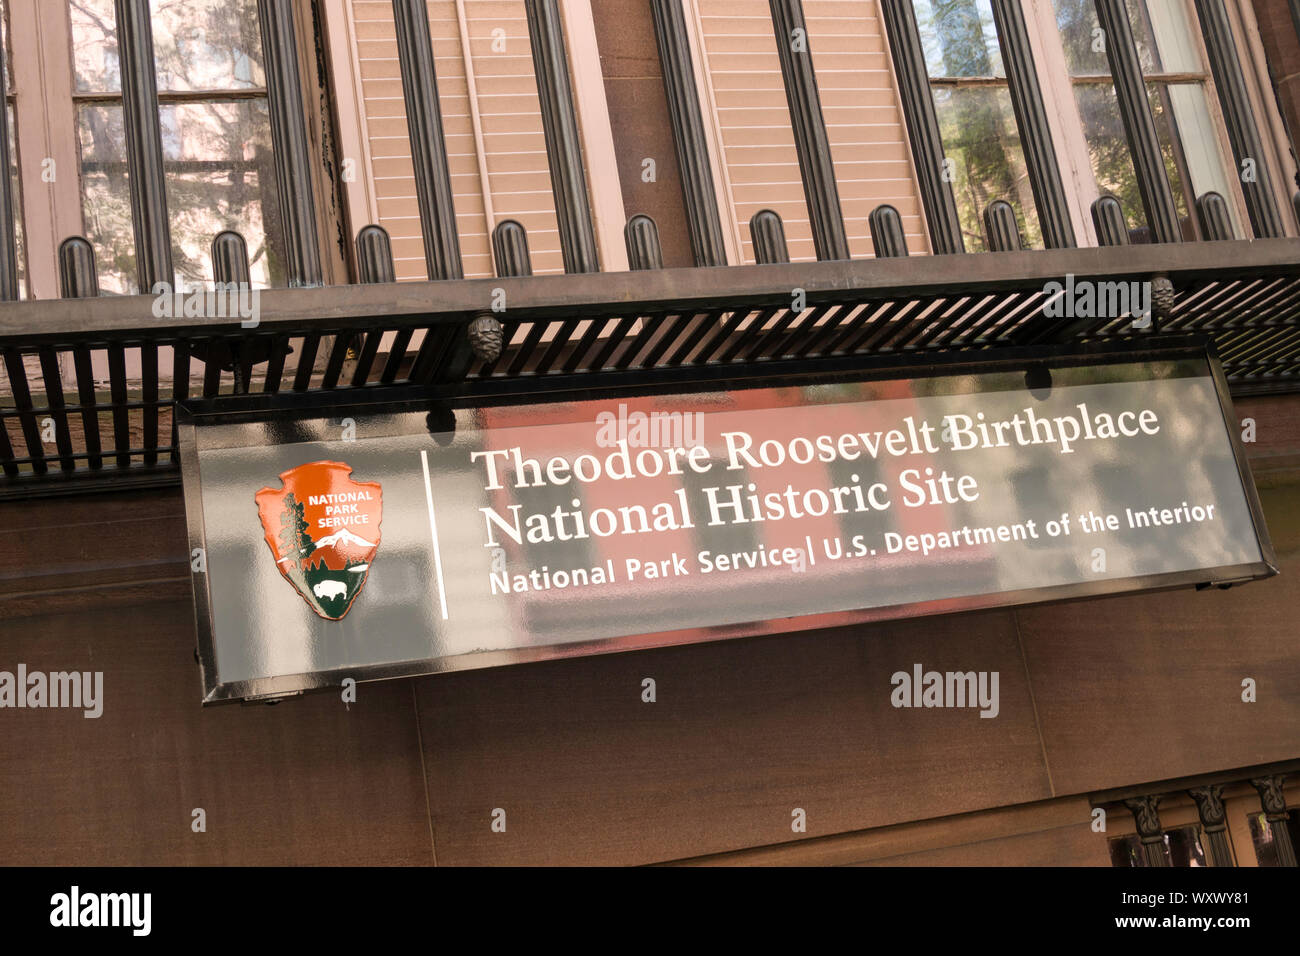 Theodore Roosevelt Birthplace National Historic Site is a recreated brownstone at 28 East 20th Street, NYC, USA Stock Photo